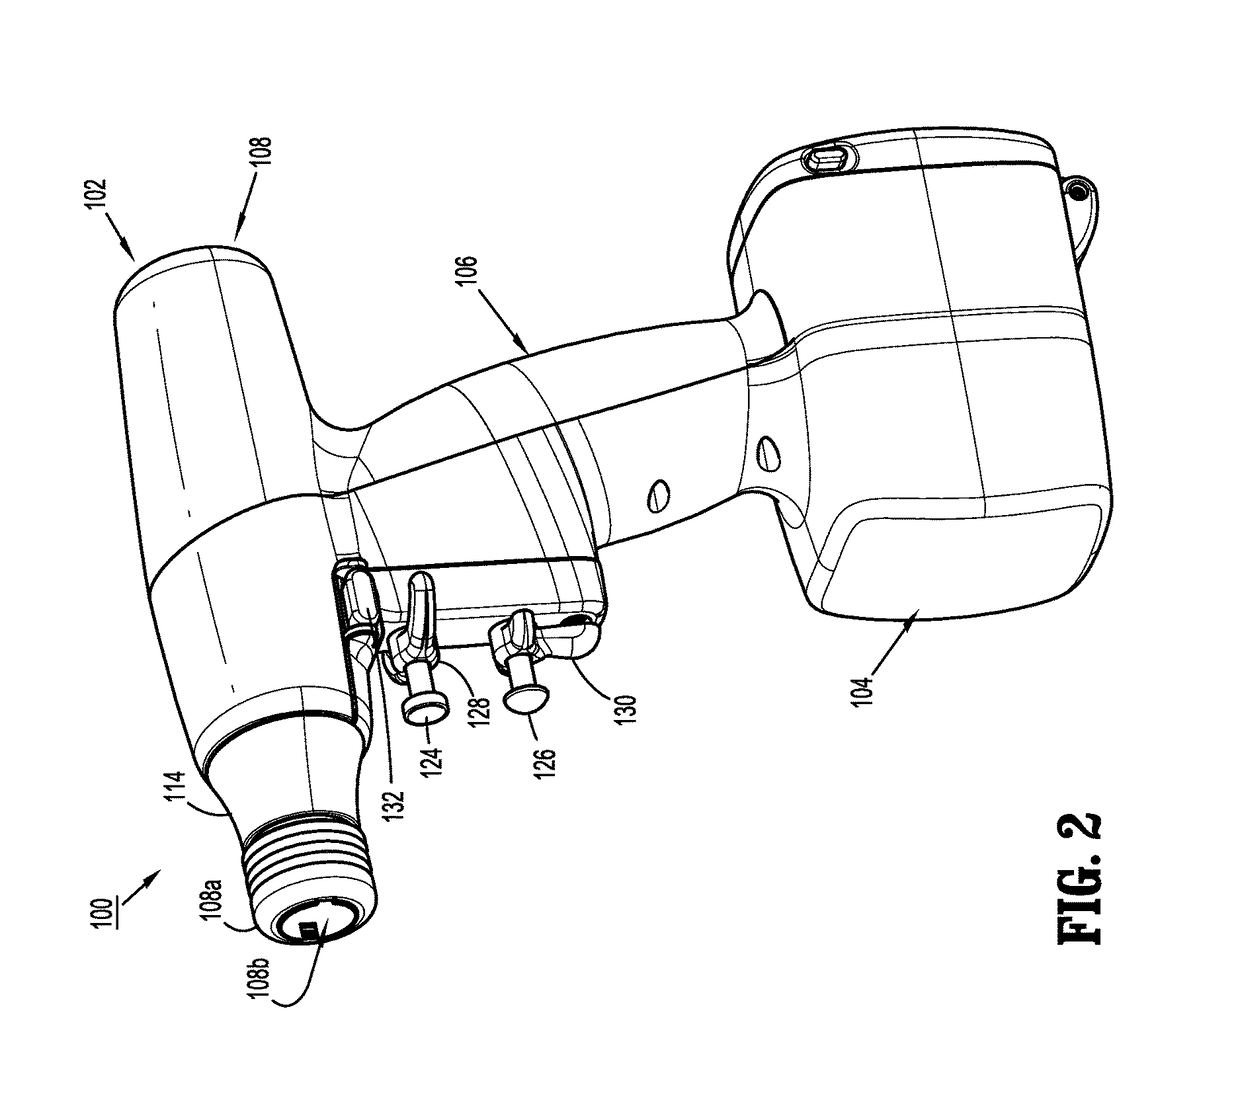 Surgical adapter assemblies for use between surgical handle assembly and surgical end effectors